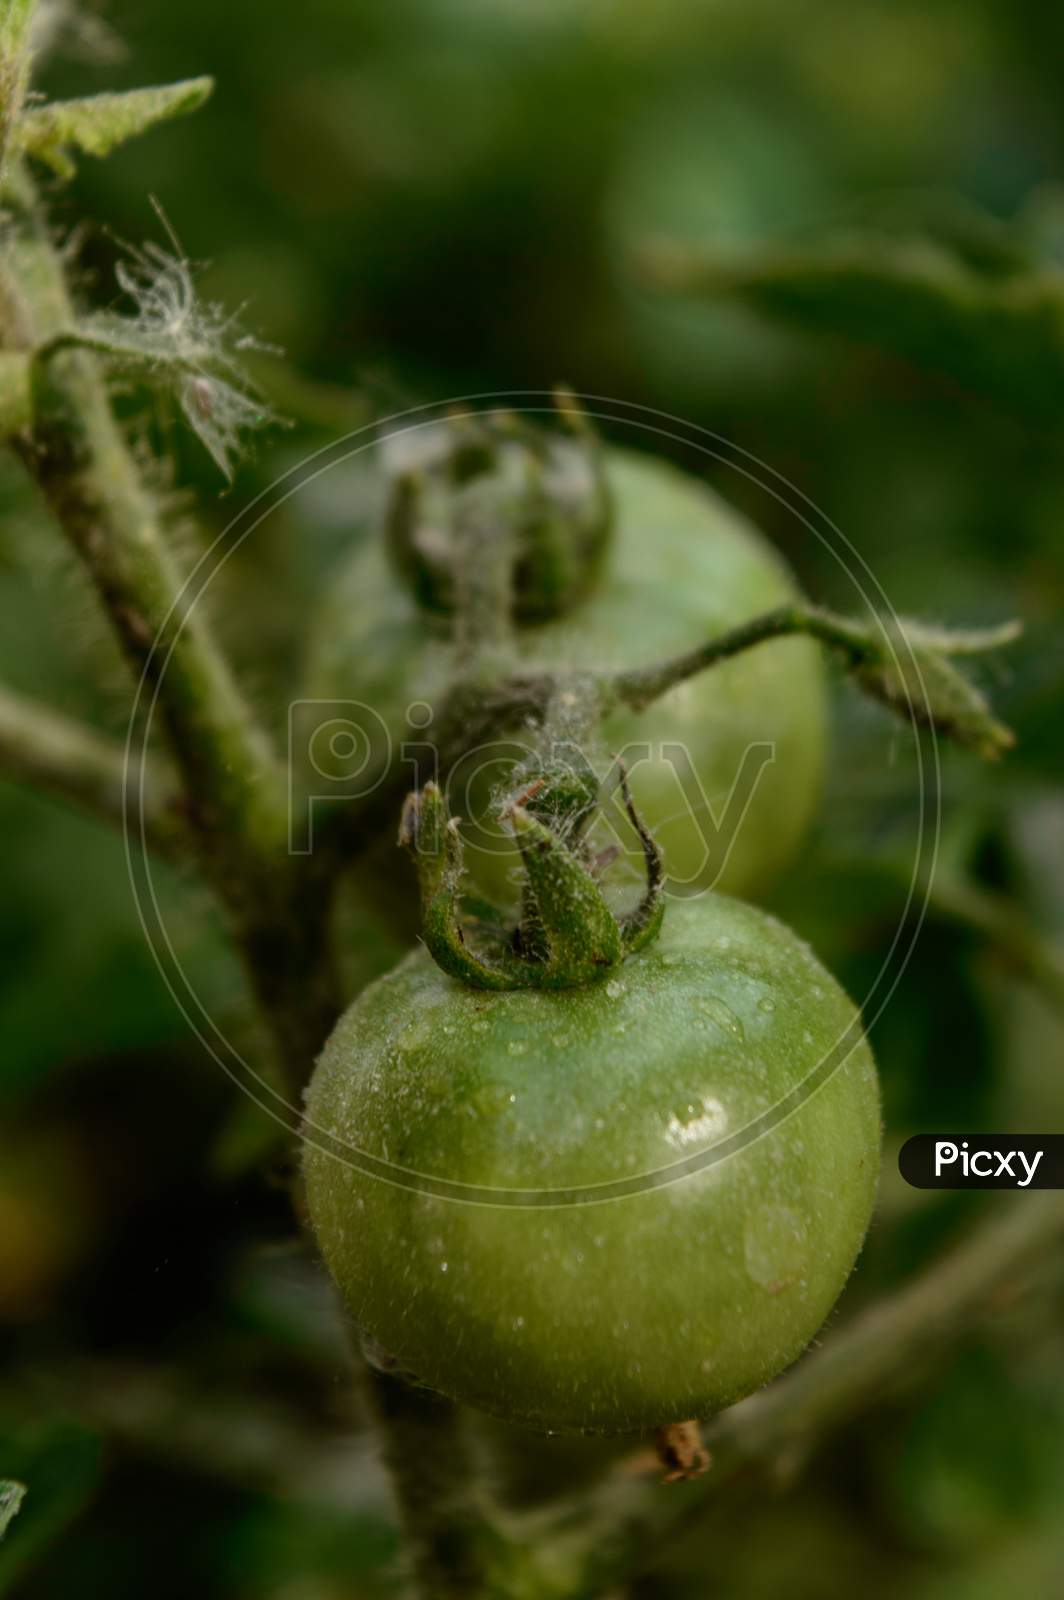 Closeup Micro Shot Of Indian Green Tomato Cover Up With Soil And Fertilizer And Water.